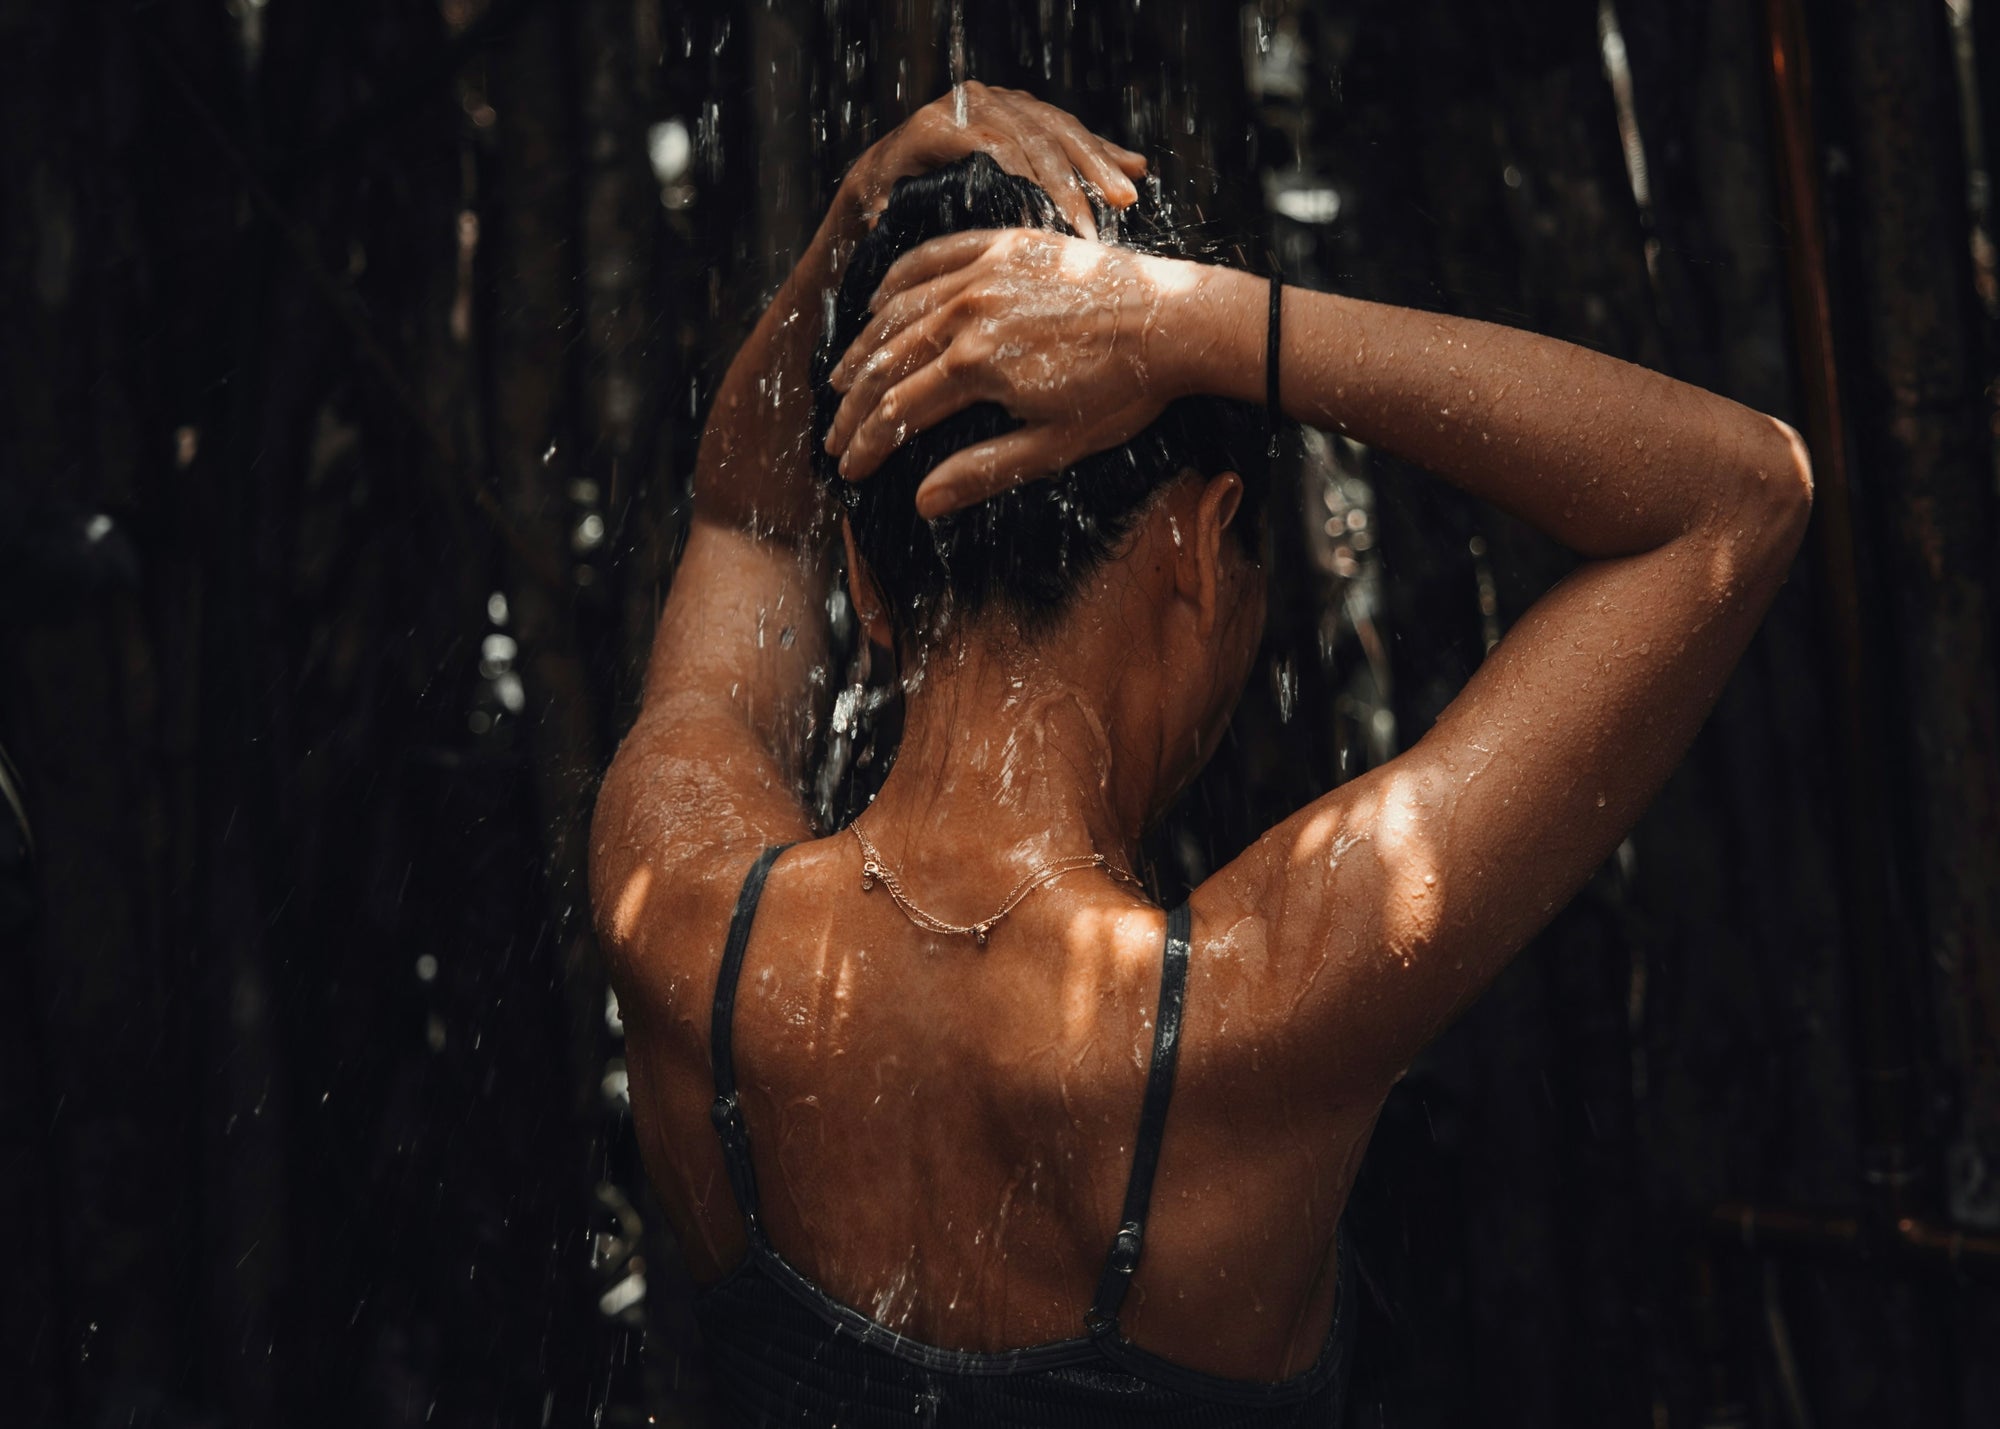 Cold Showers for Skin Health: Good or Bad?